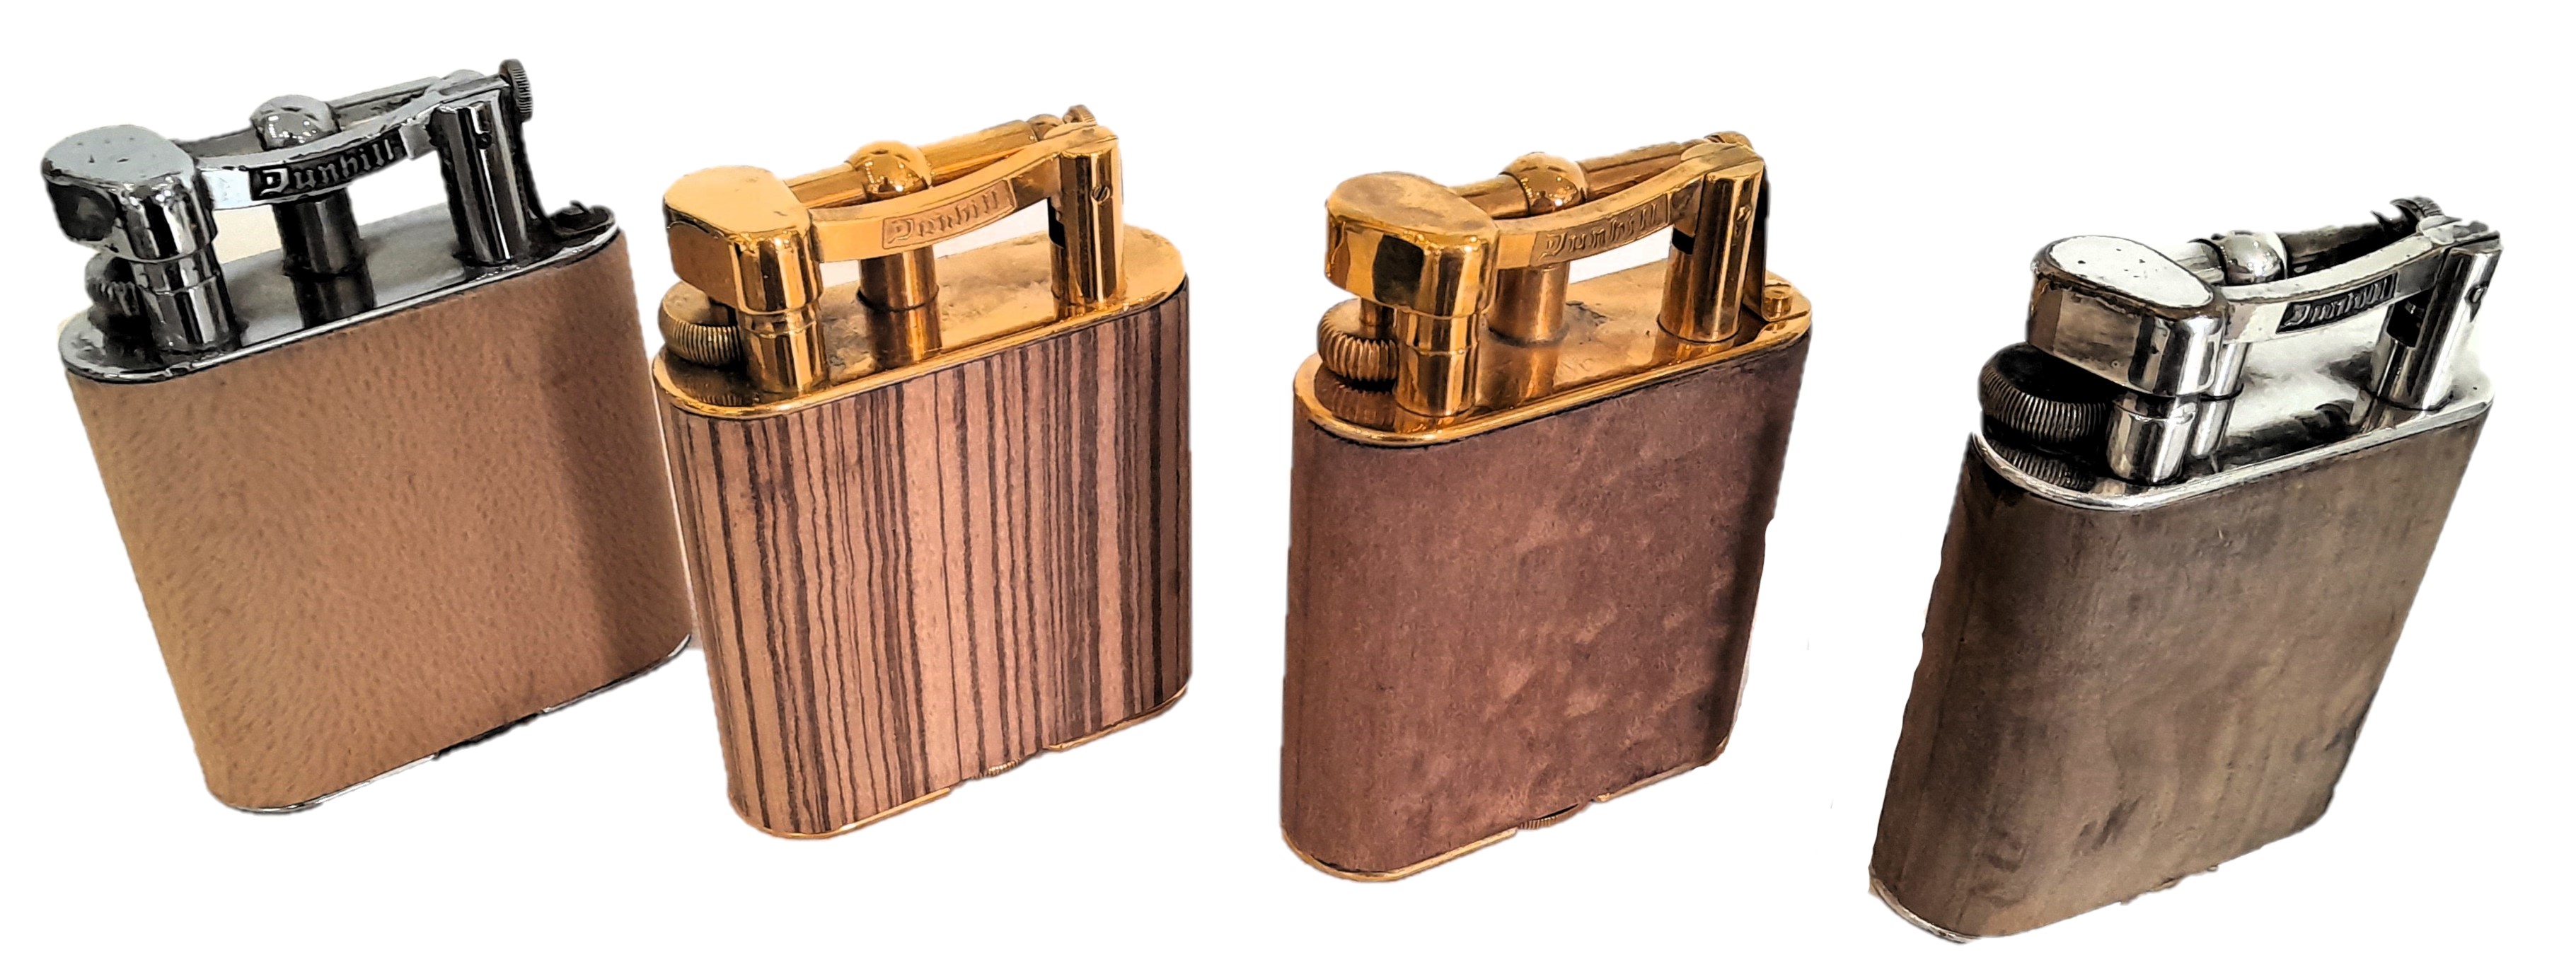 Dunhill Lighters 1670 - Click for details